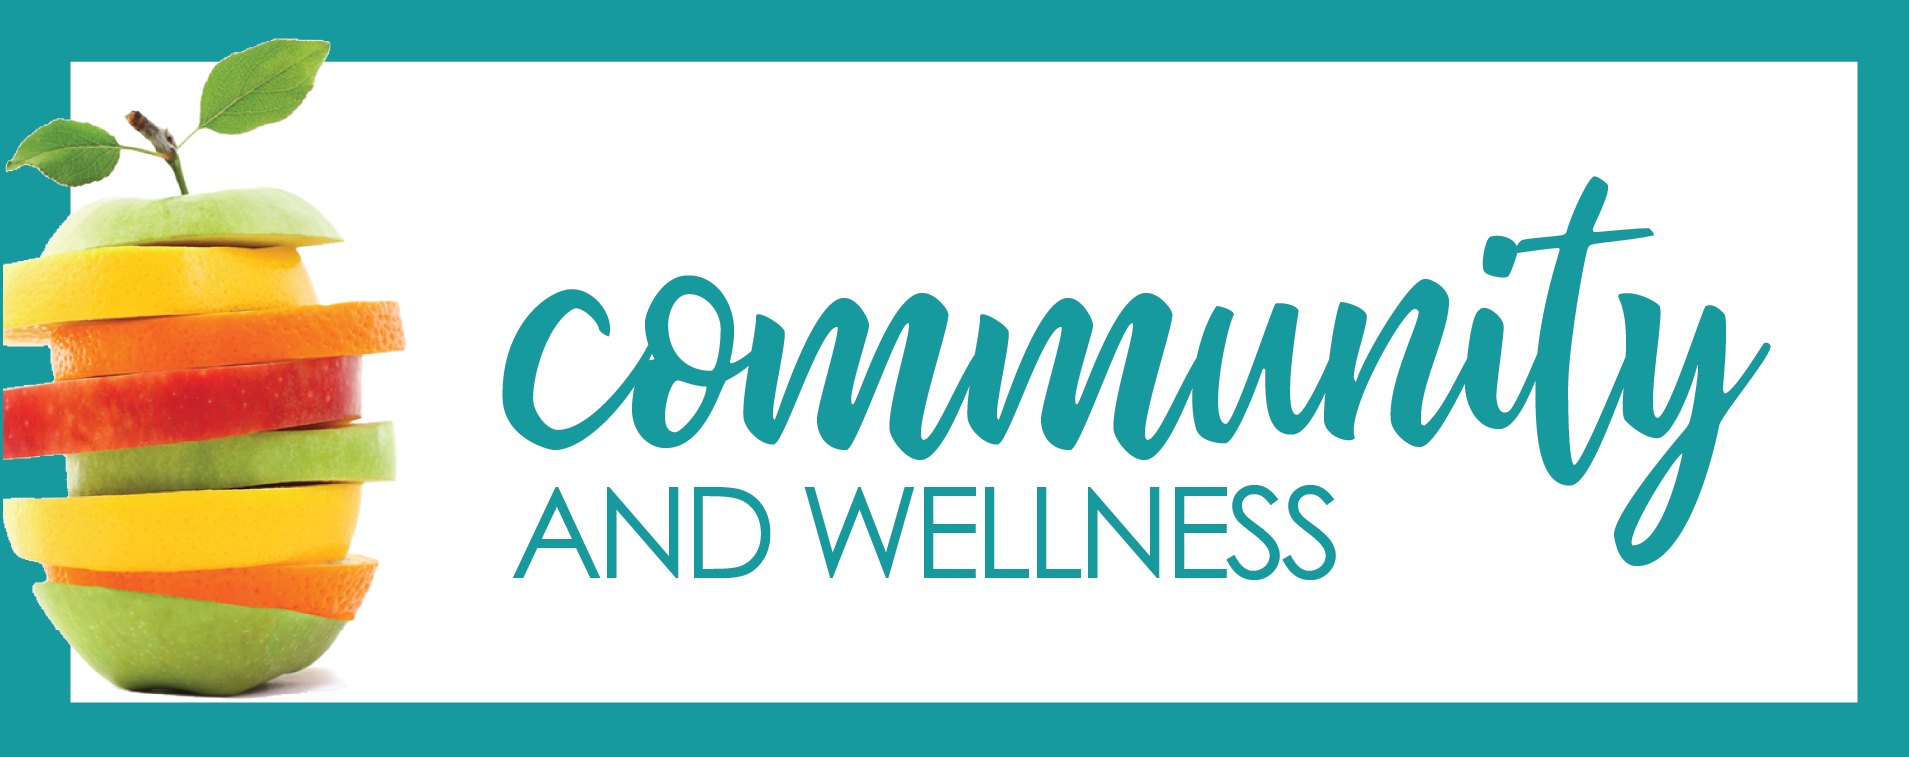 https://eurestcafes.compass-usa.com/SiteCollectionImages/home/Community-%20Wellness%20Banner.png